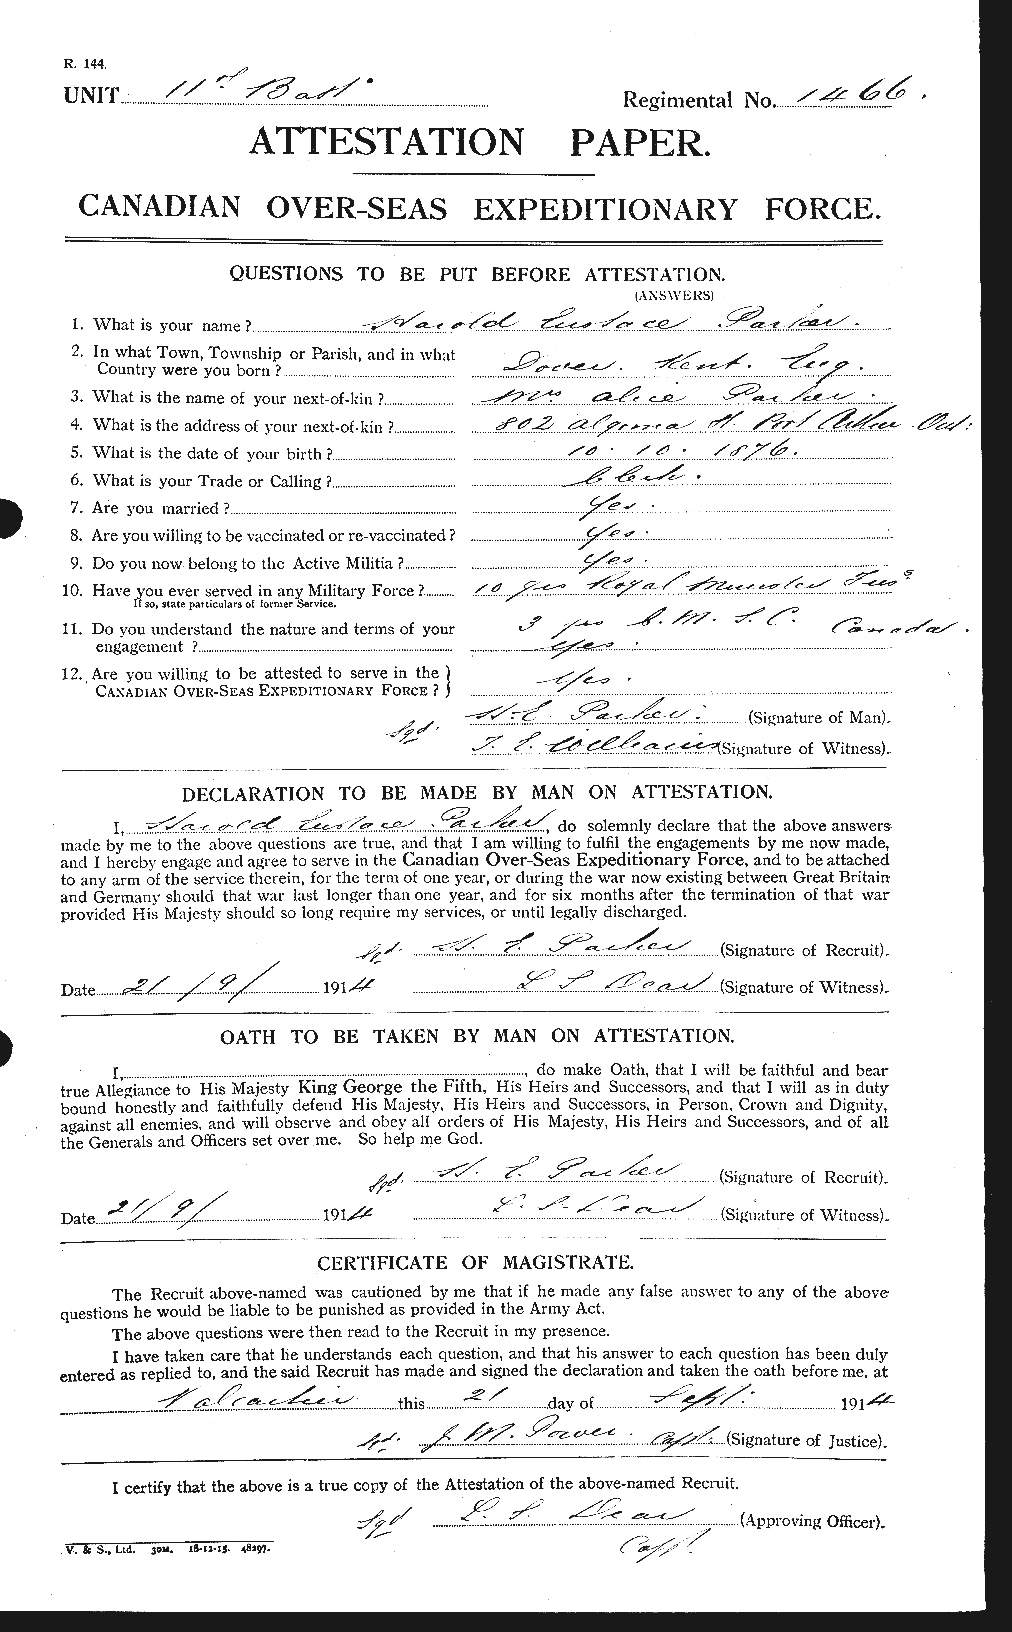 Personnel Records of the First World War - CEF 565307a